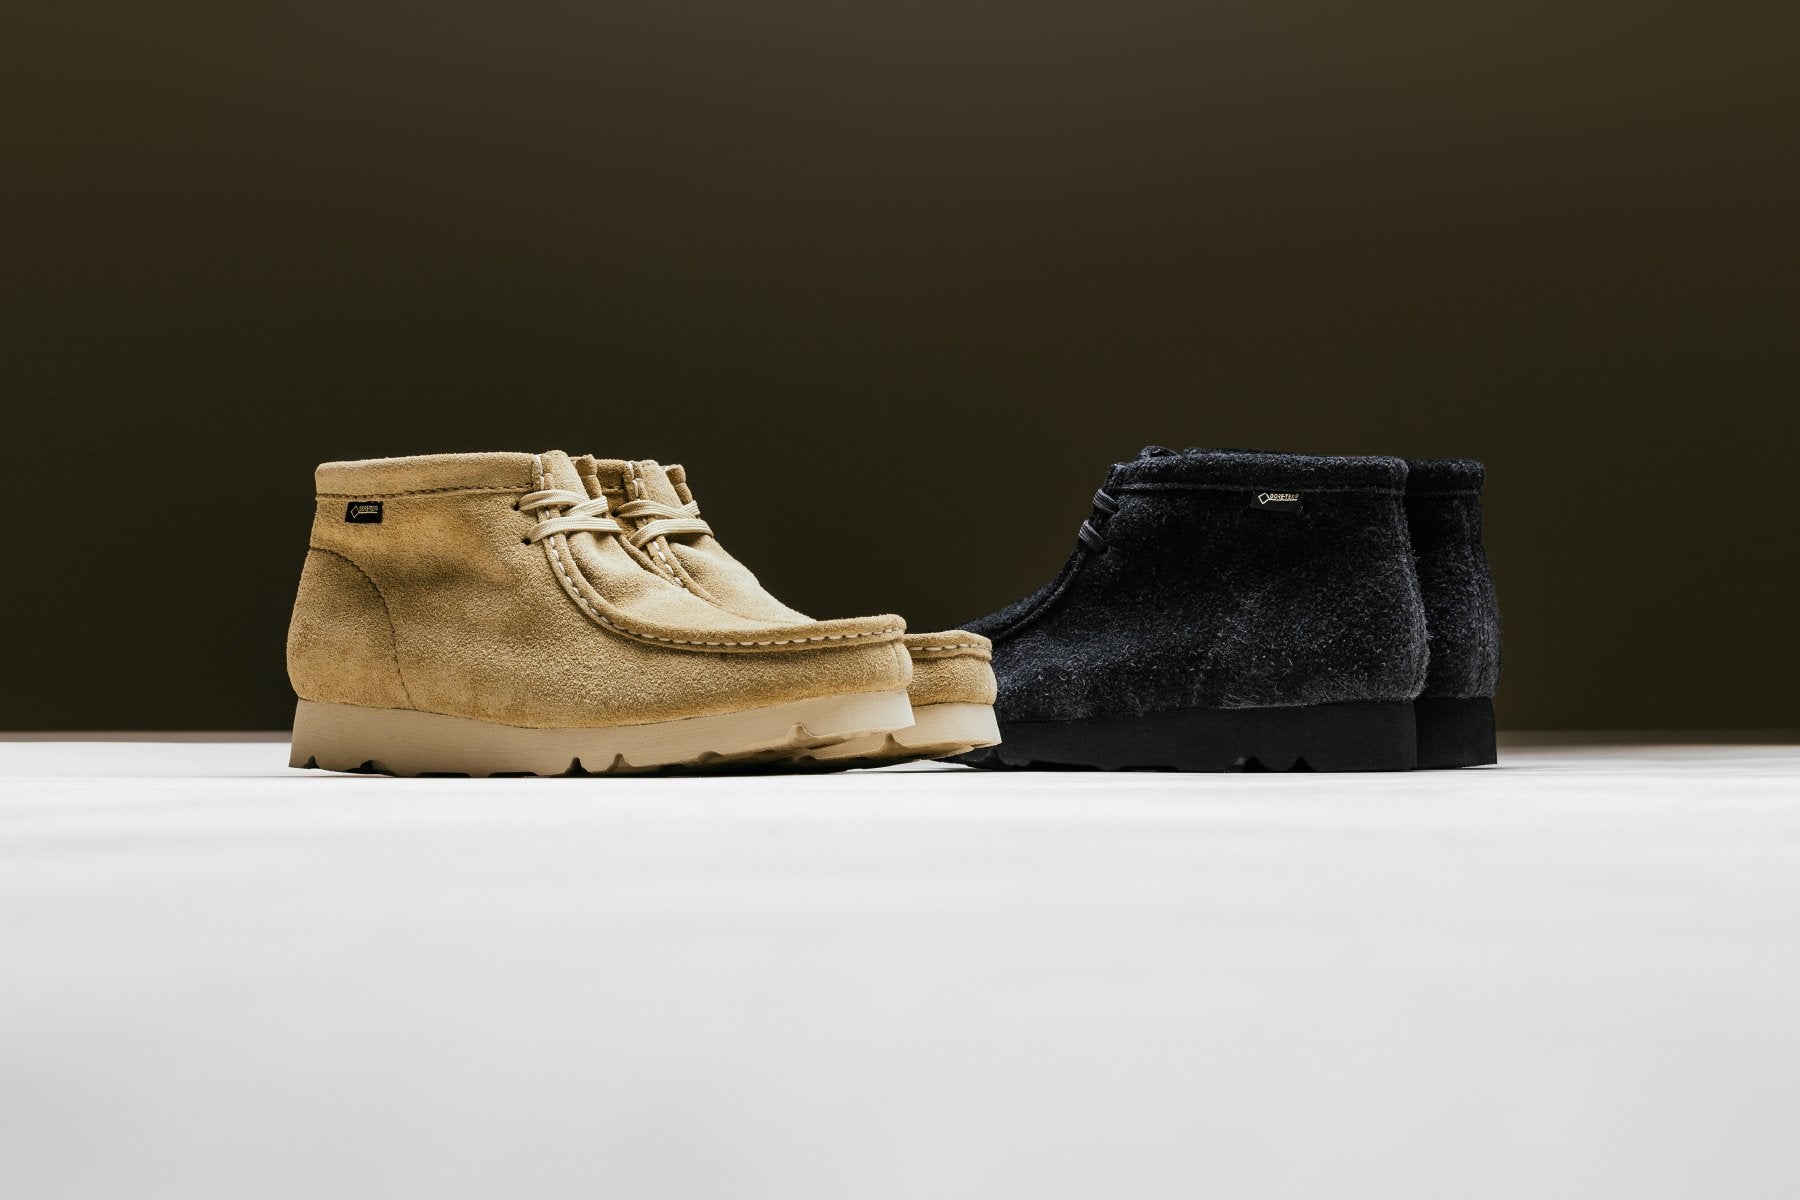 Clarks x Beams Wallabee Boot Pack Available Now – Feature